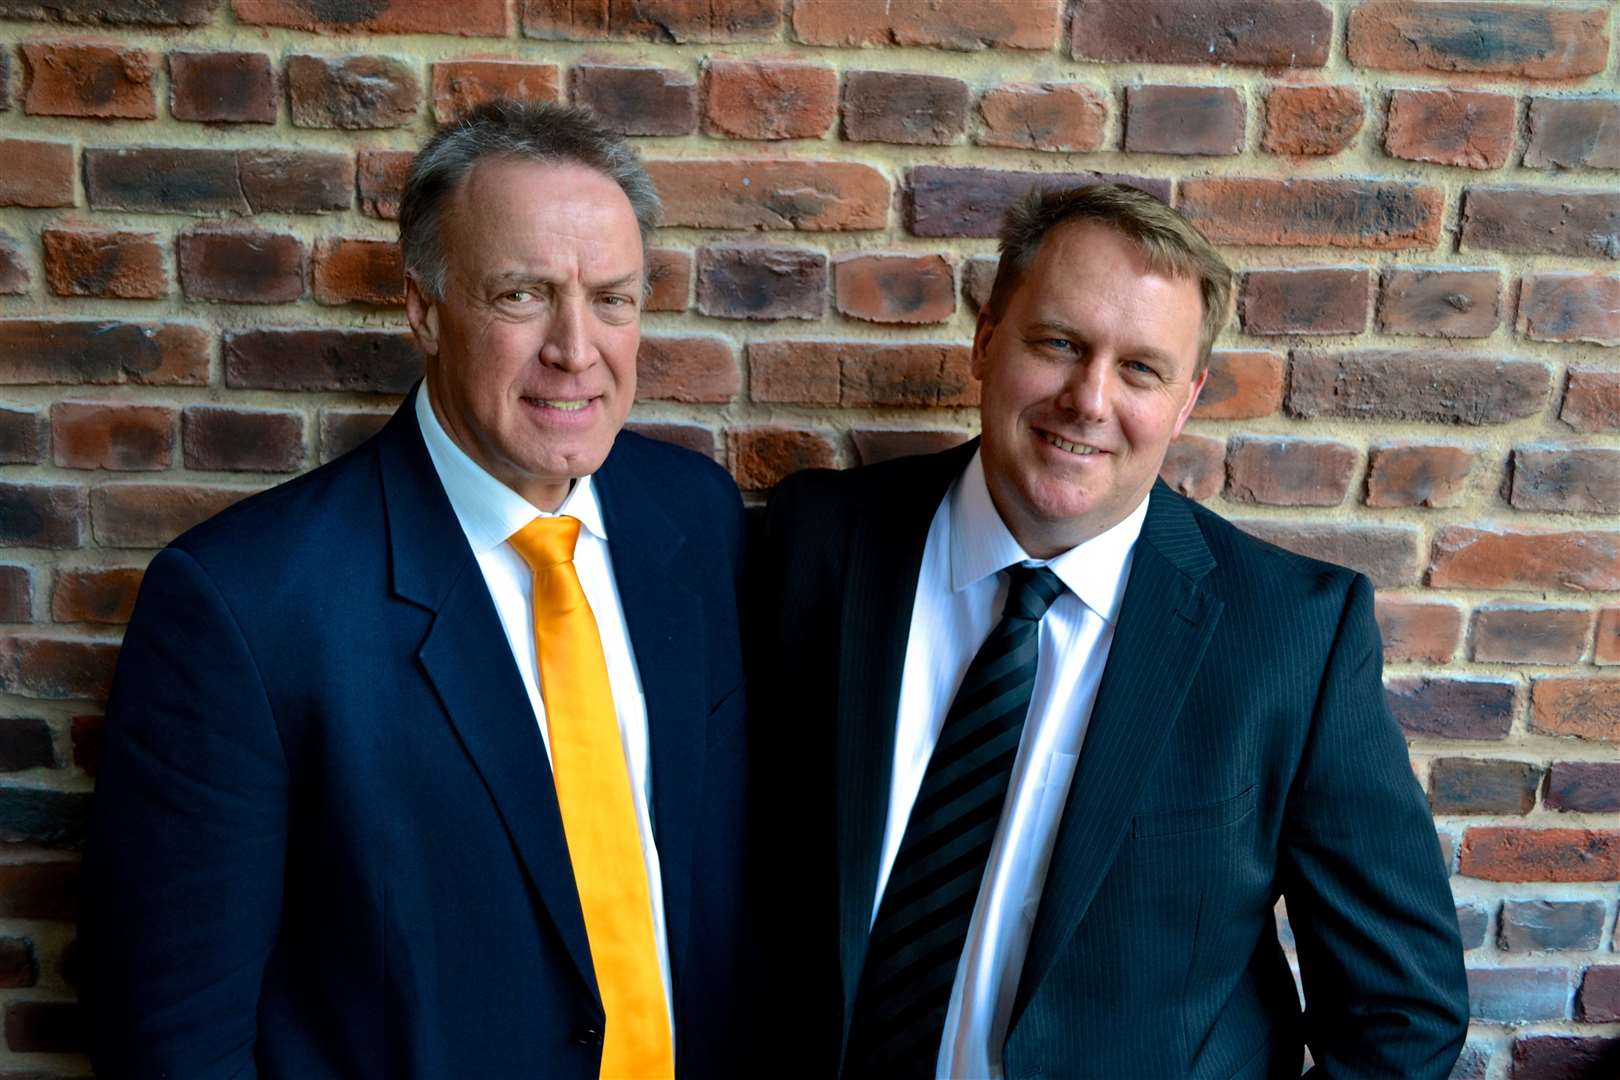 Fourex founders Oliver Du Toit and Jeff Patterson